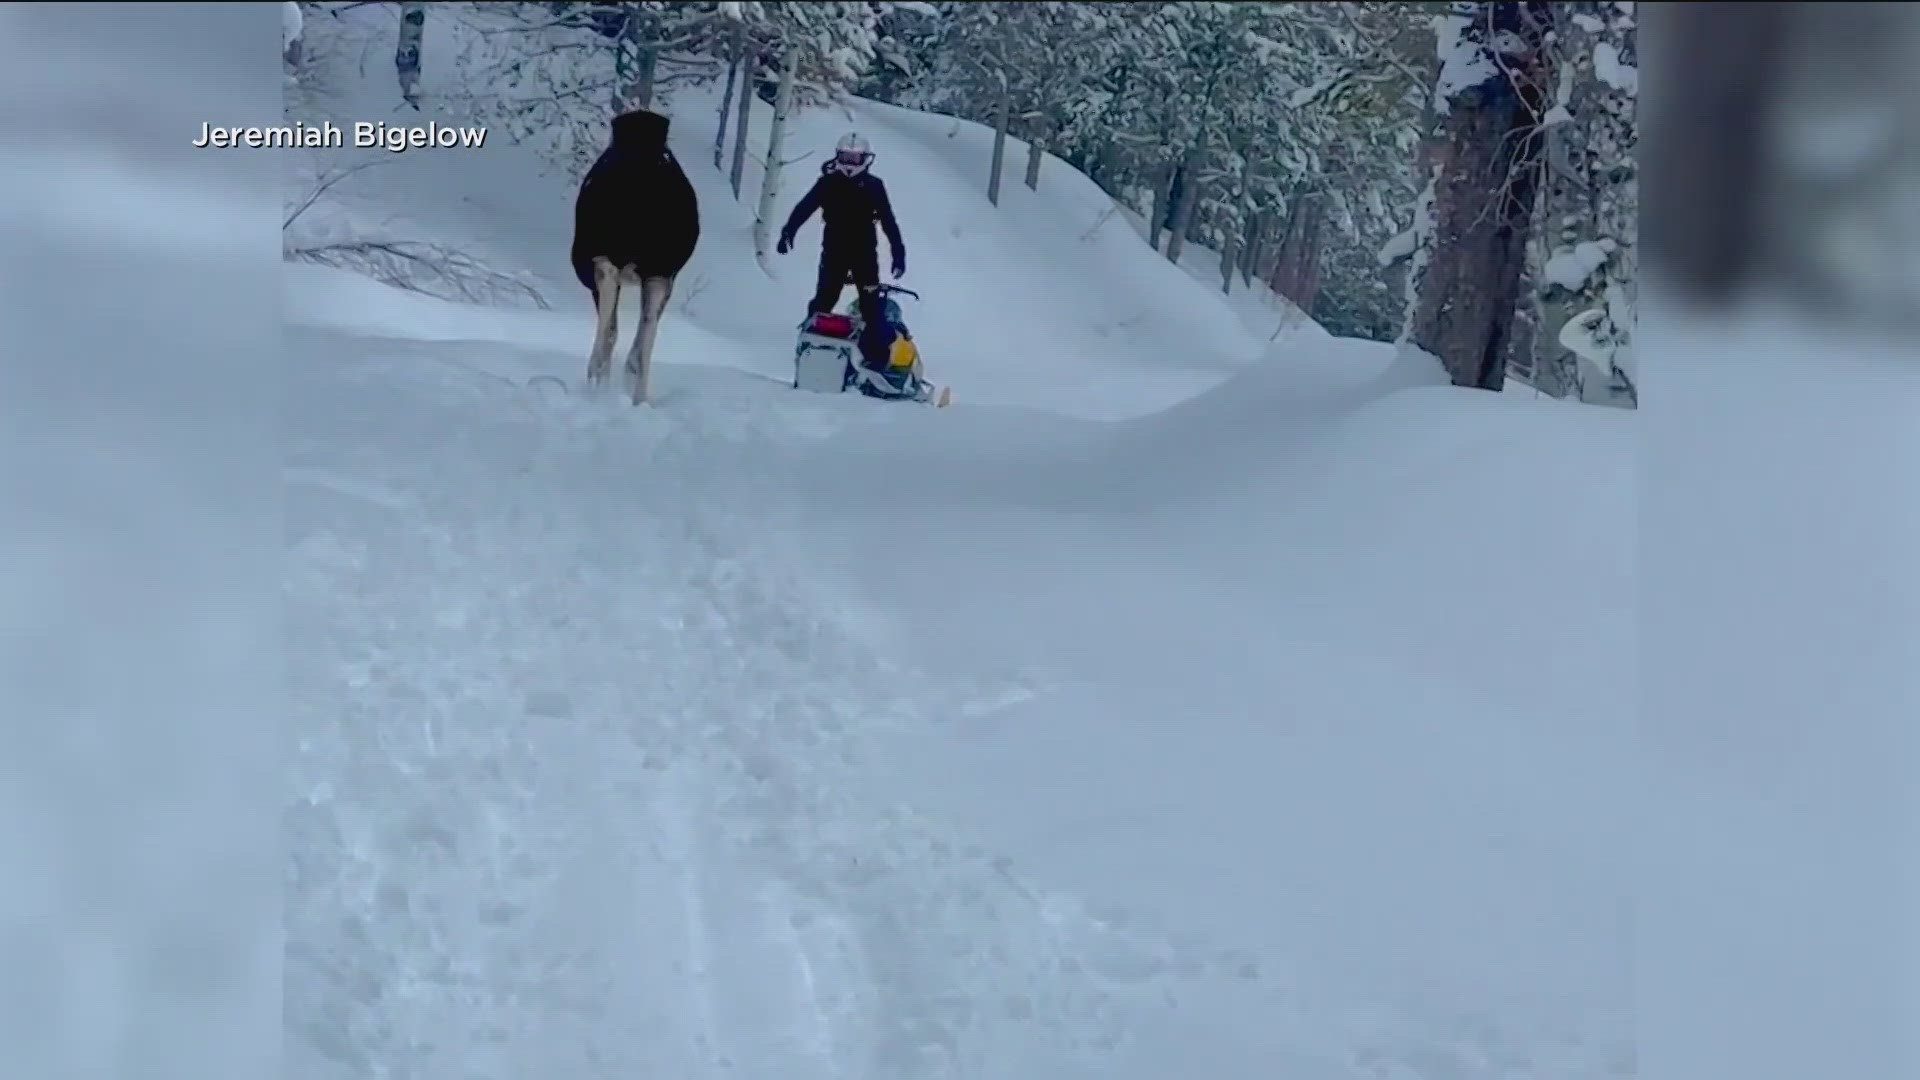 In the terrifying moment caught on video, neither moose nor man was hurt, but a snow machine took a beating.